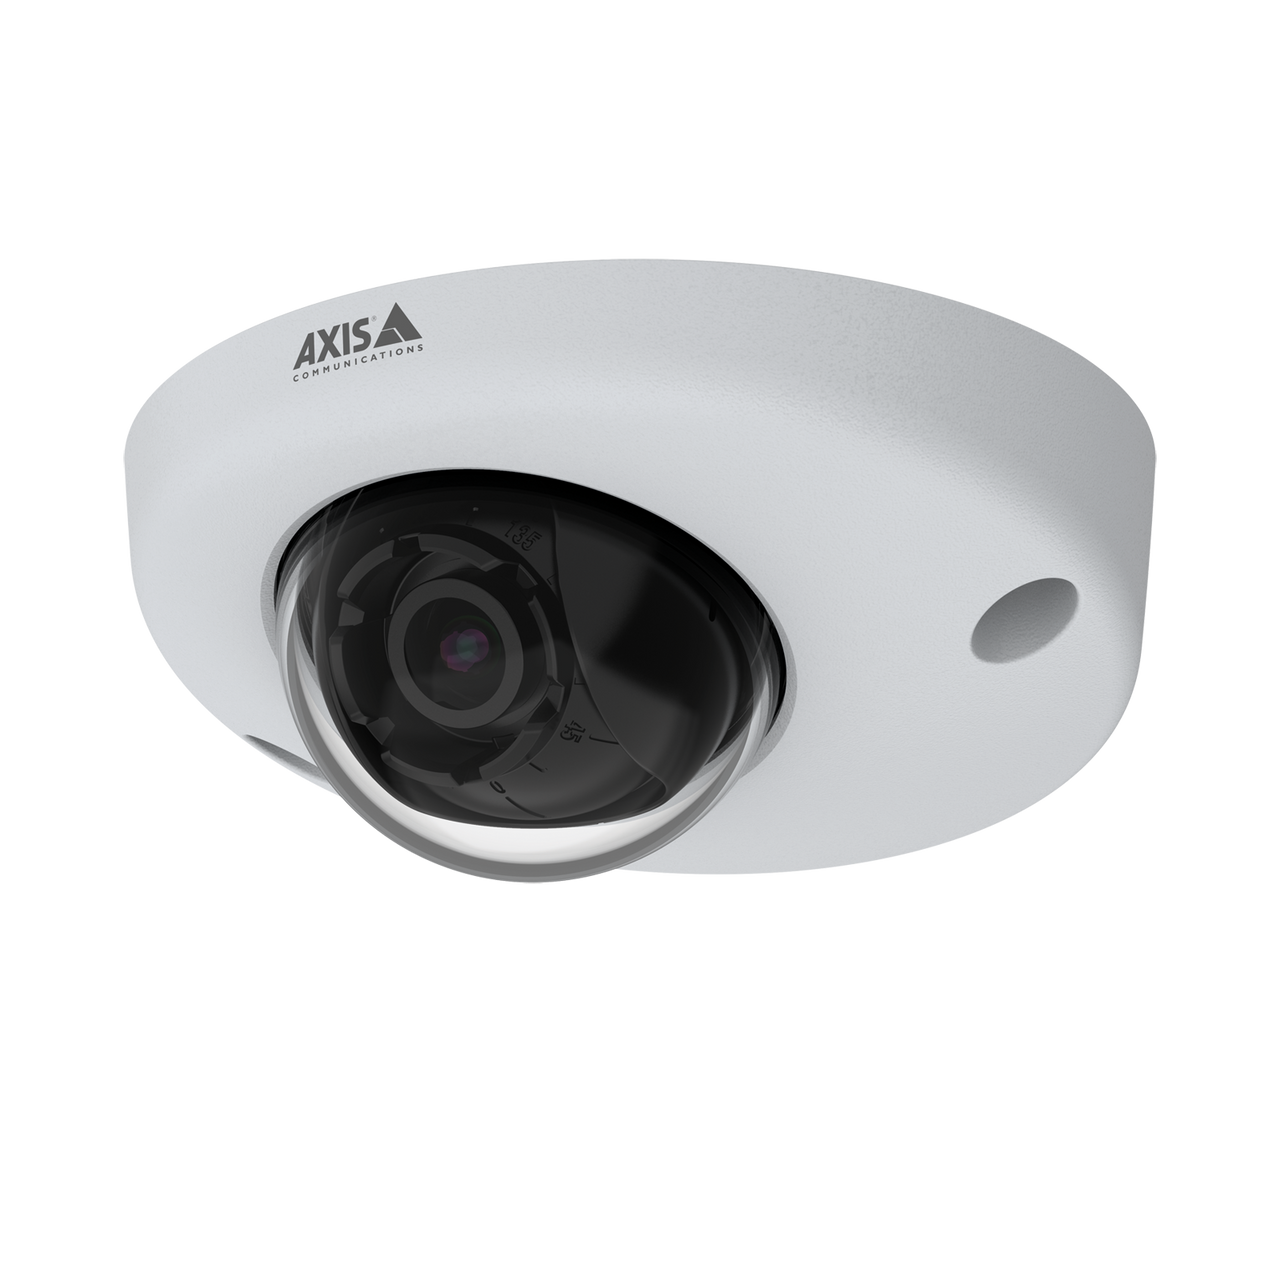 AXIS P3925-R M12 Best-in-class dome for advanced onboard surveillance